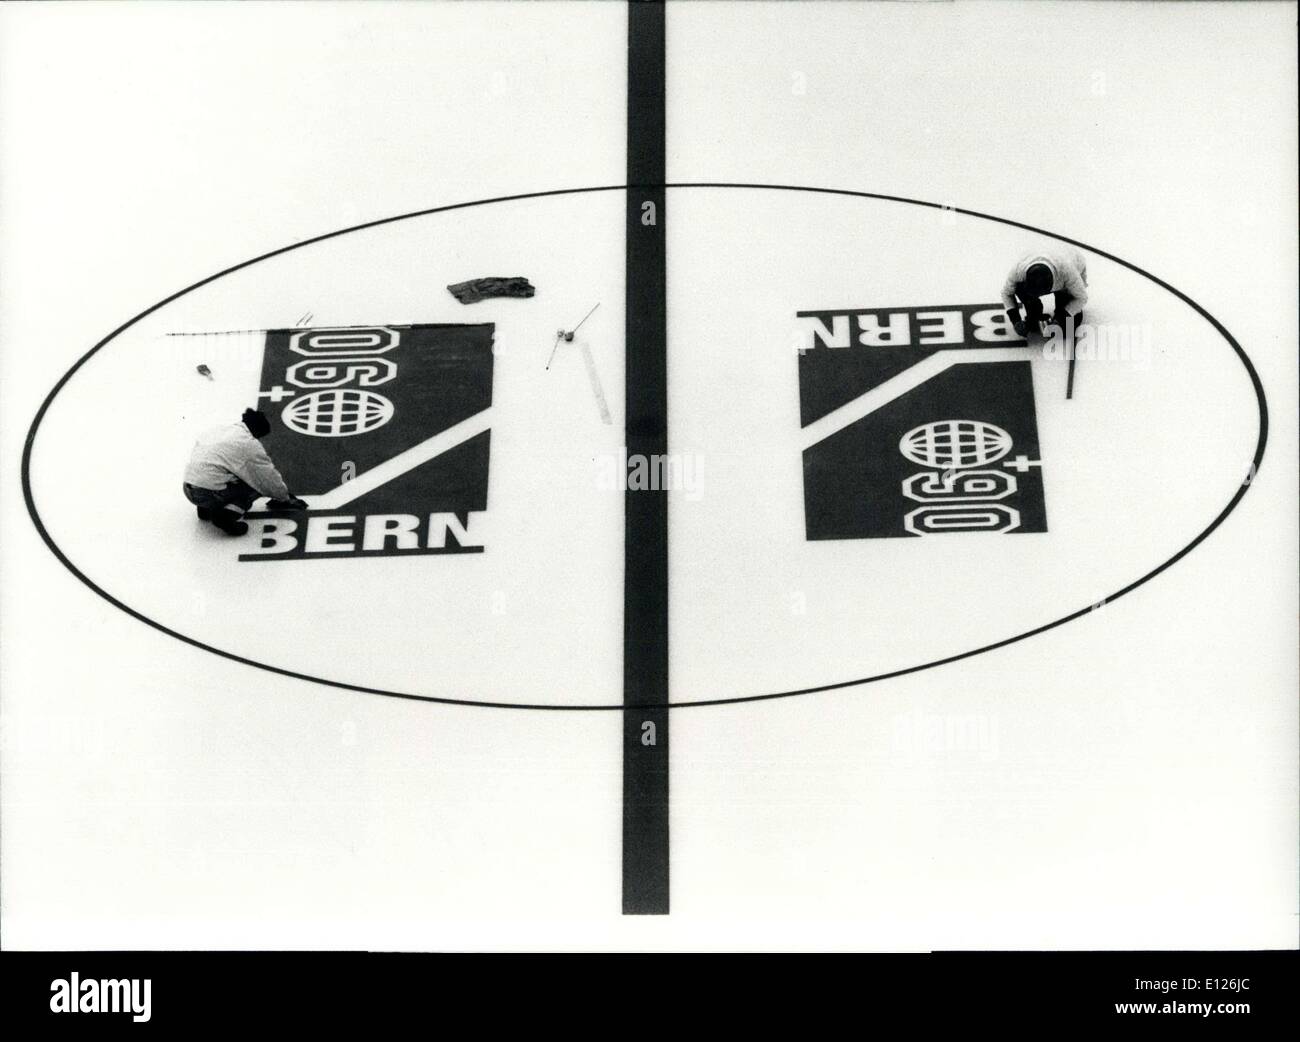 Apr. 11, 1990 - Eishockey A WC in Berne; Eishockey World Championship will be held in Berne (Switzerland) from April 16th to May 2nd. Photo Shows Last details were prepared at the ice stadion of Berne. Stock Photo